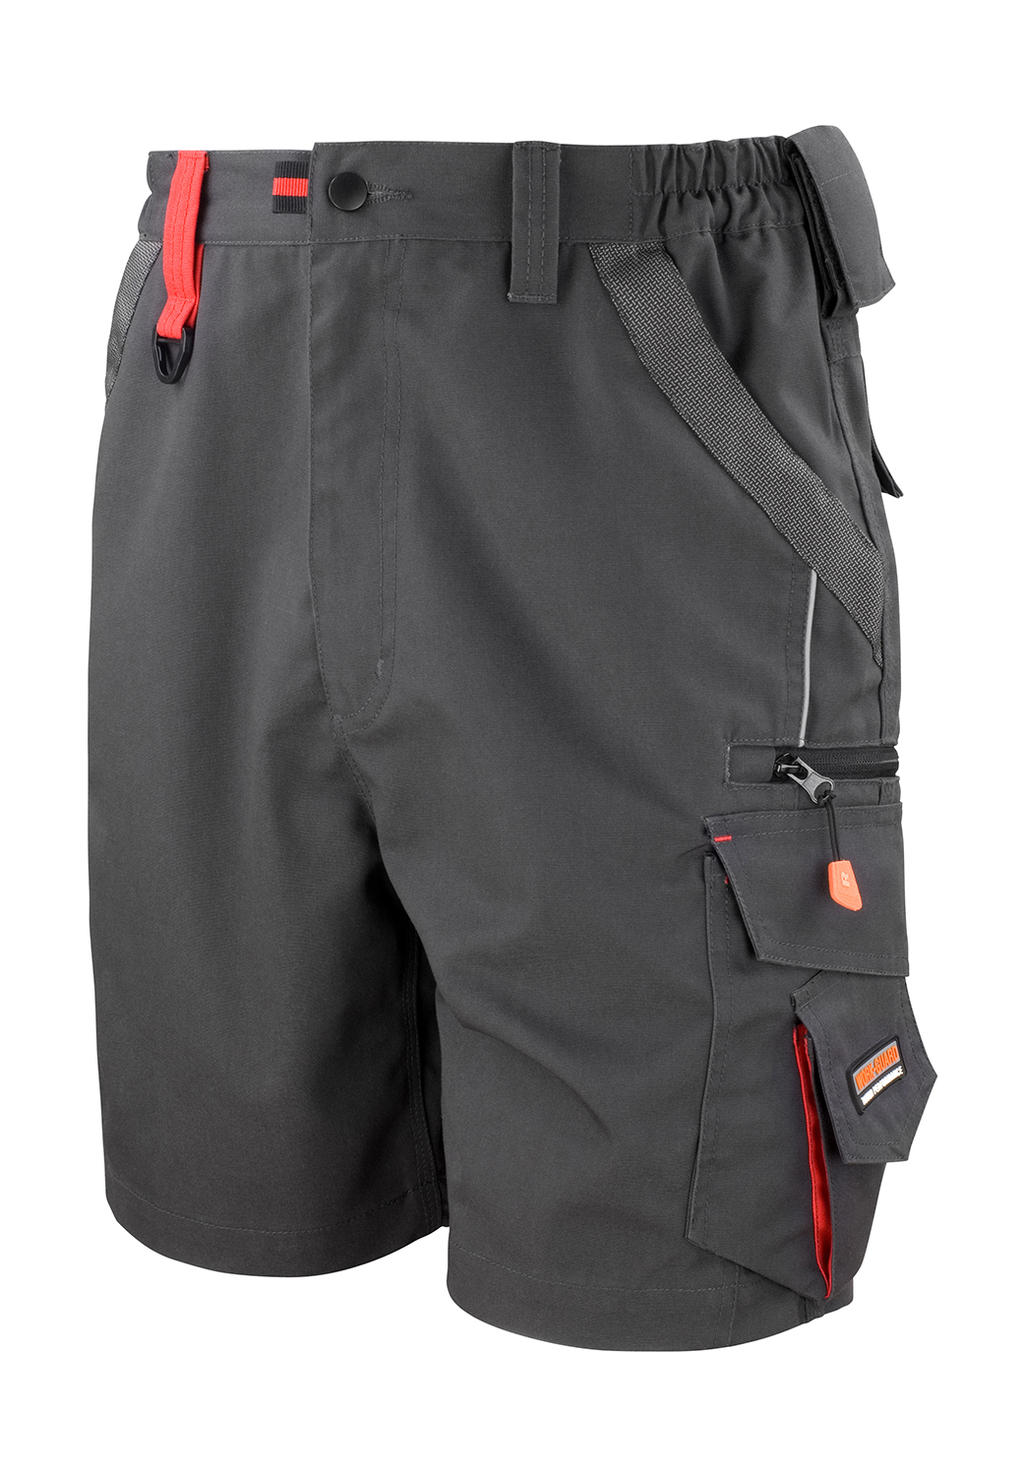  Work-Guard Technical Shorts in Farbe Grey/Black